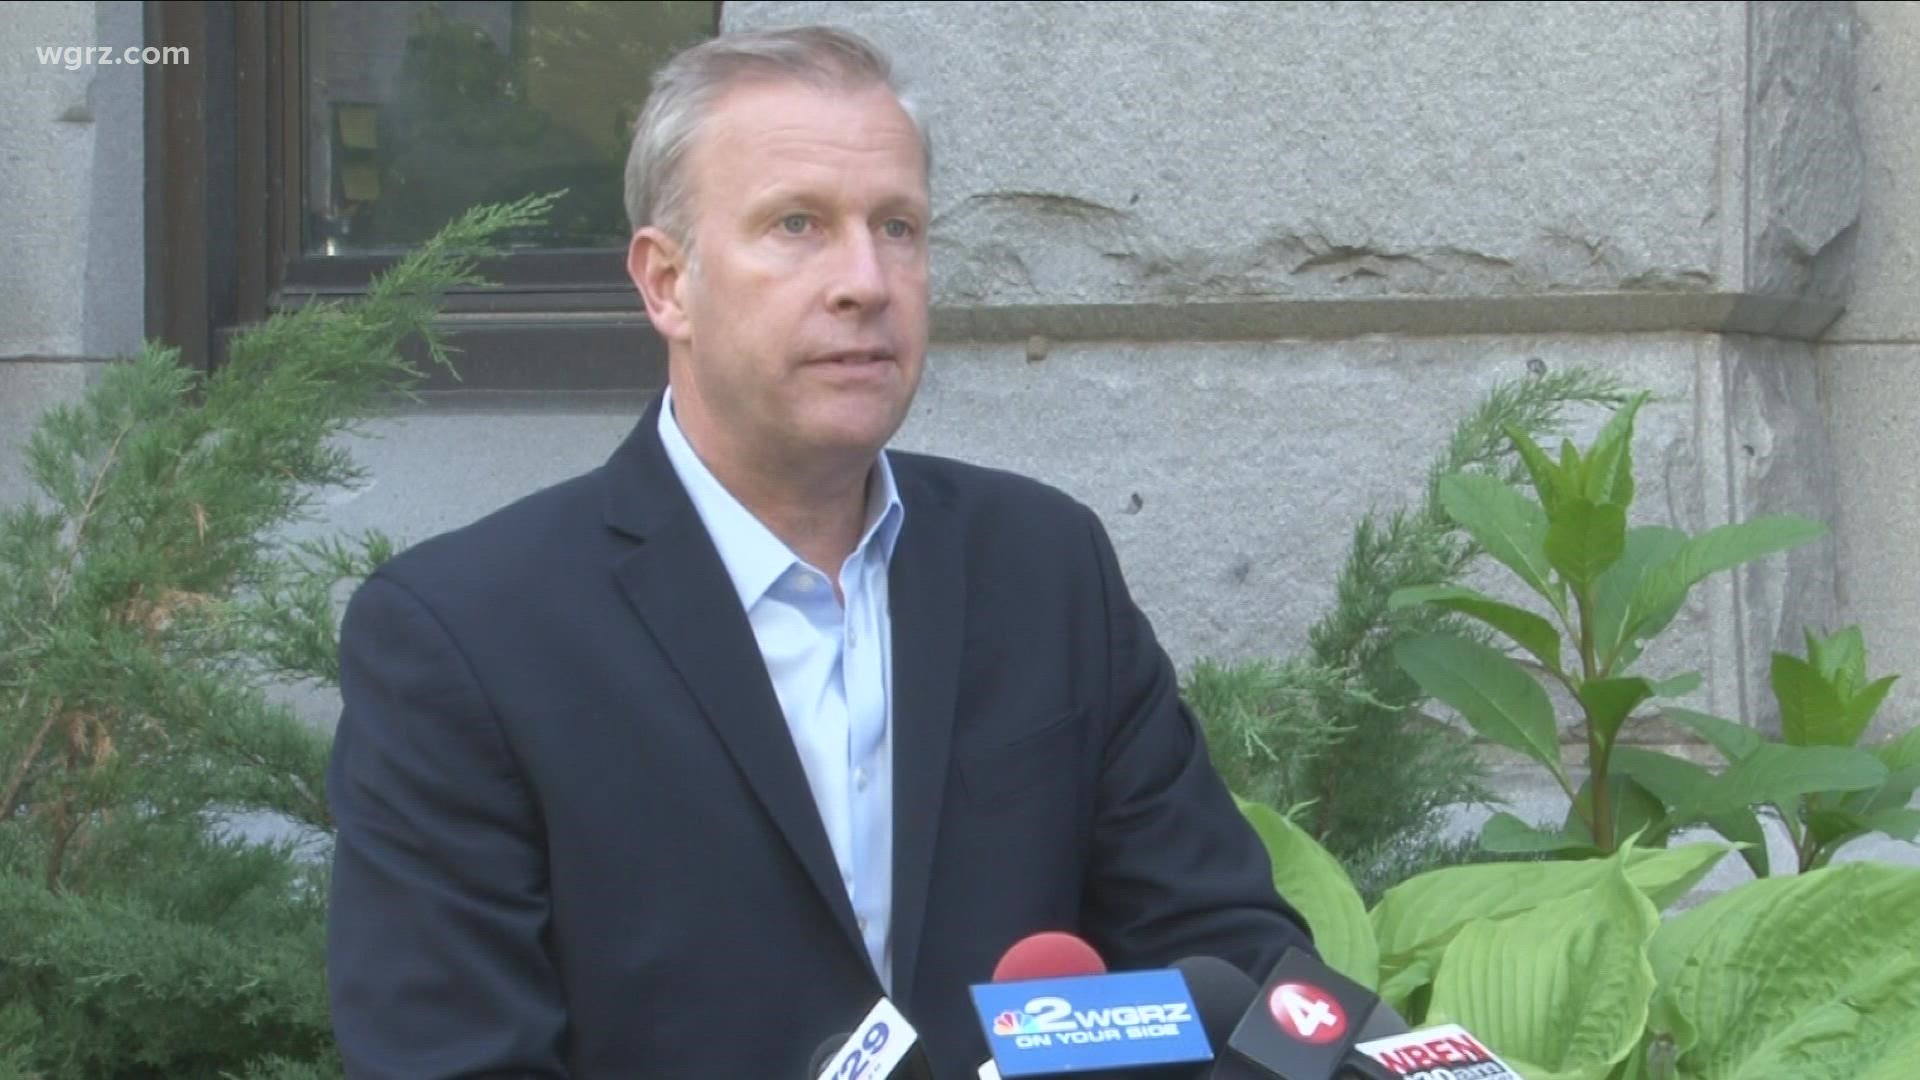 Congressman Chris Jacobs announced he will no longer seek re-election. Jacobs says the outcome of redistricting and his changed stance on gun control played a roll.